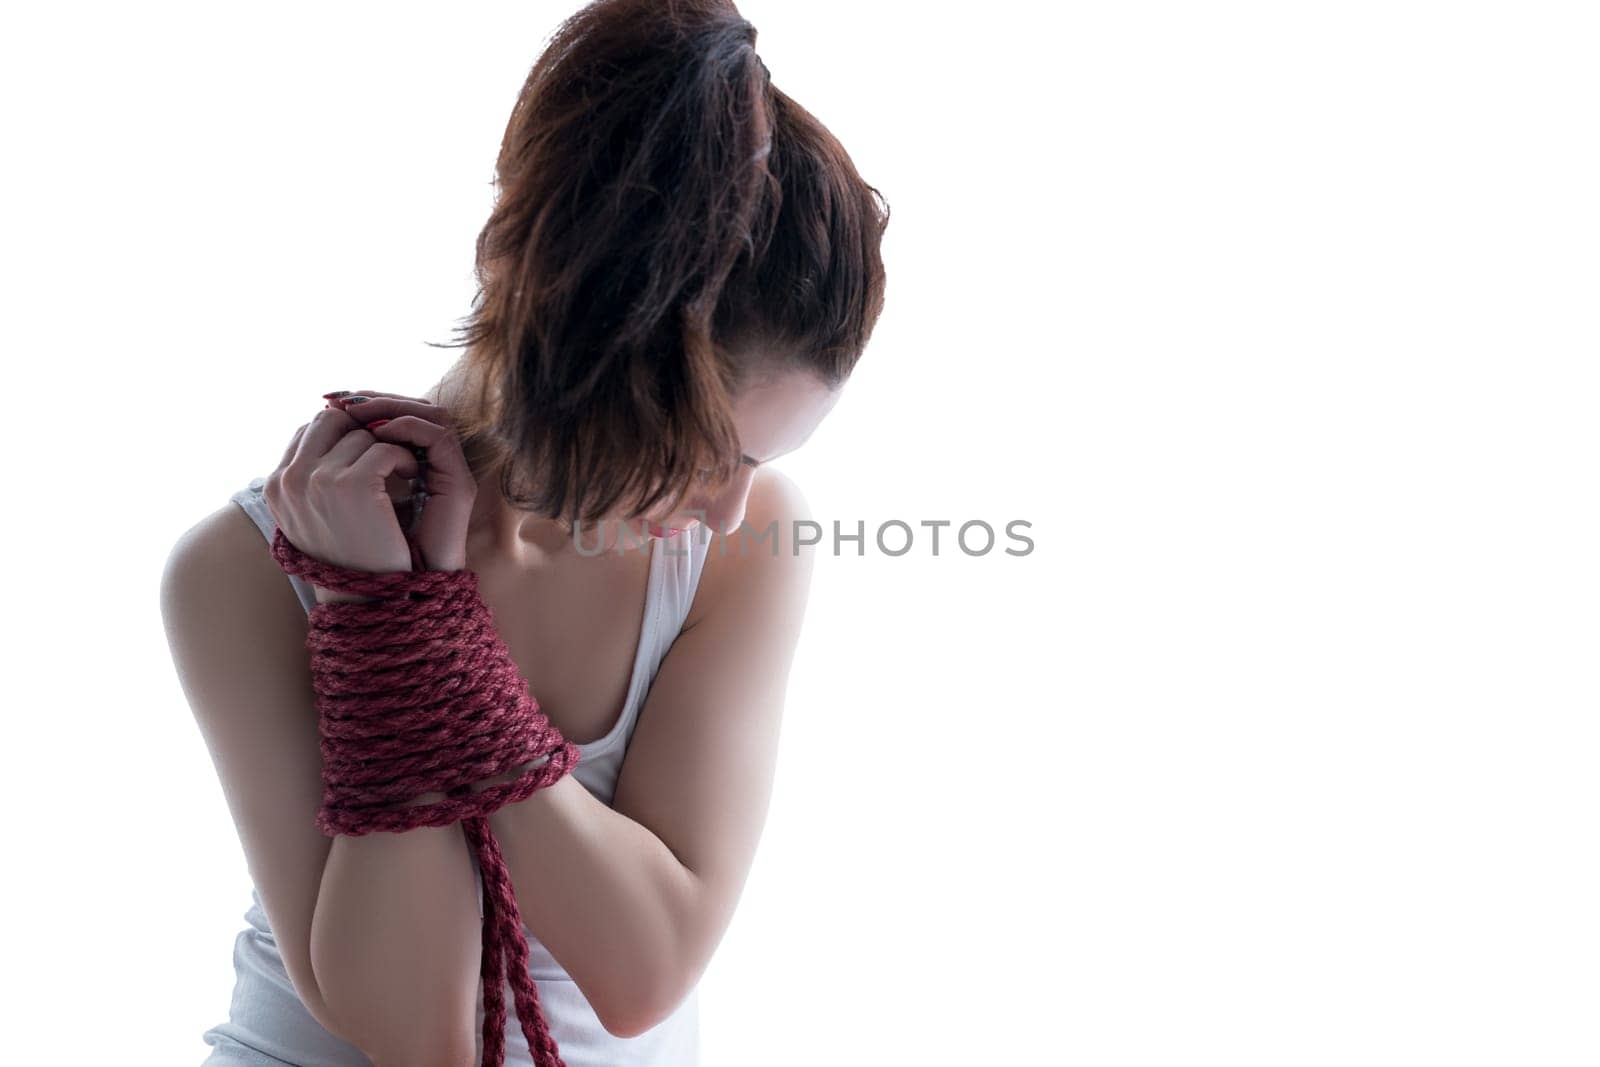 Image of dark-haired woman posing with hands bound